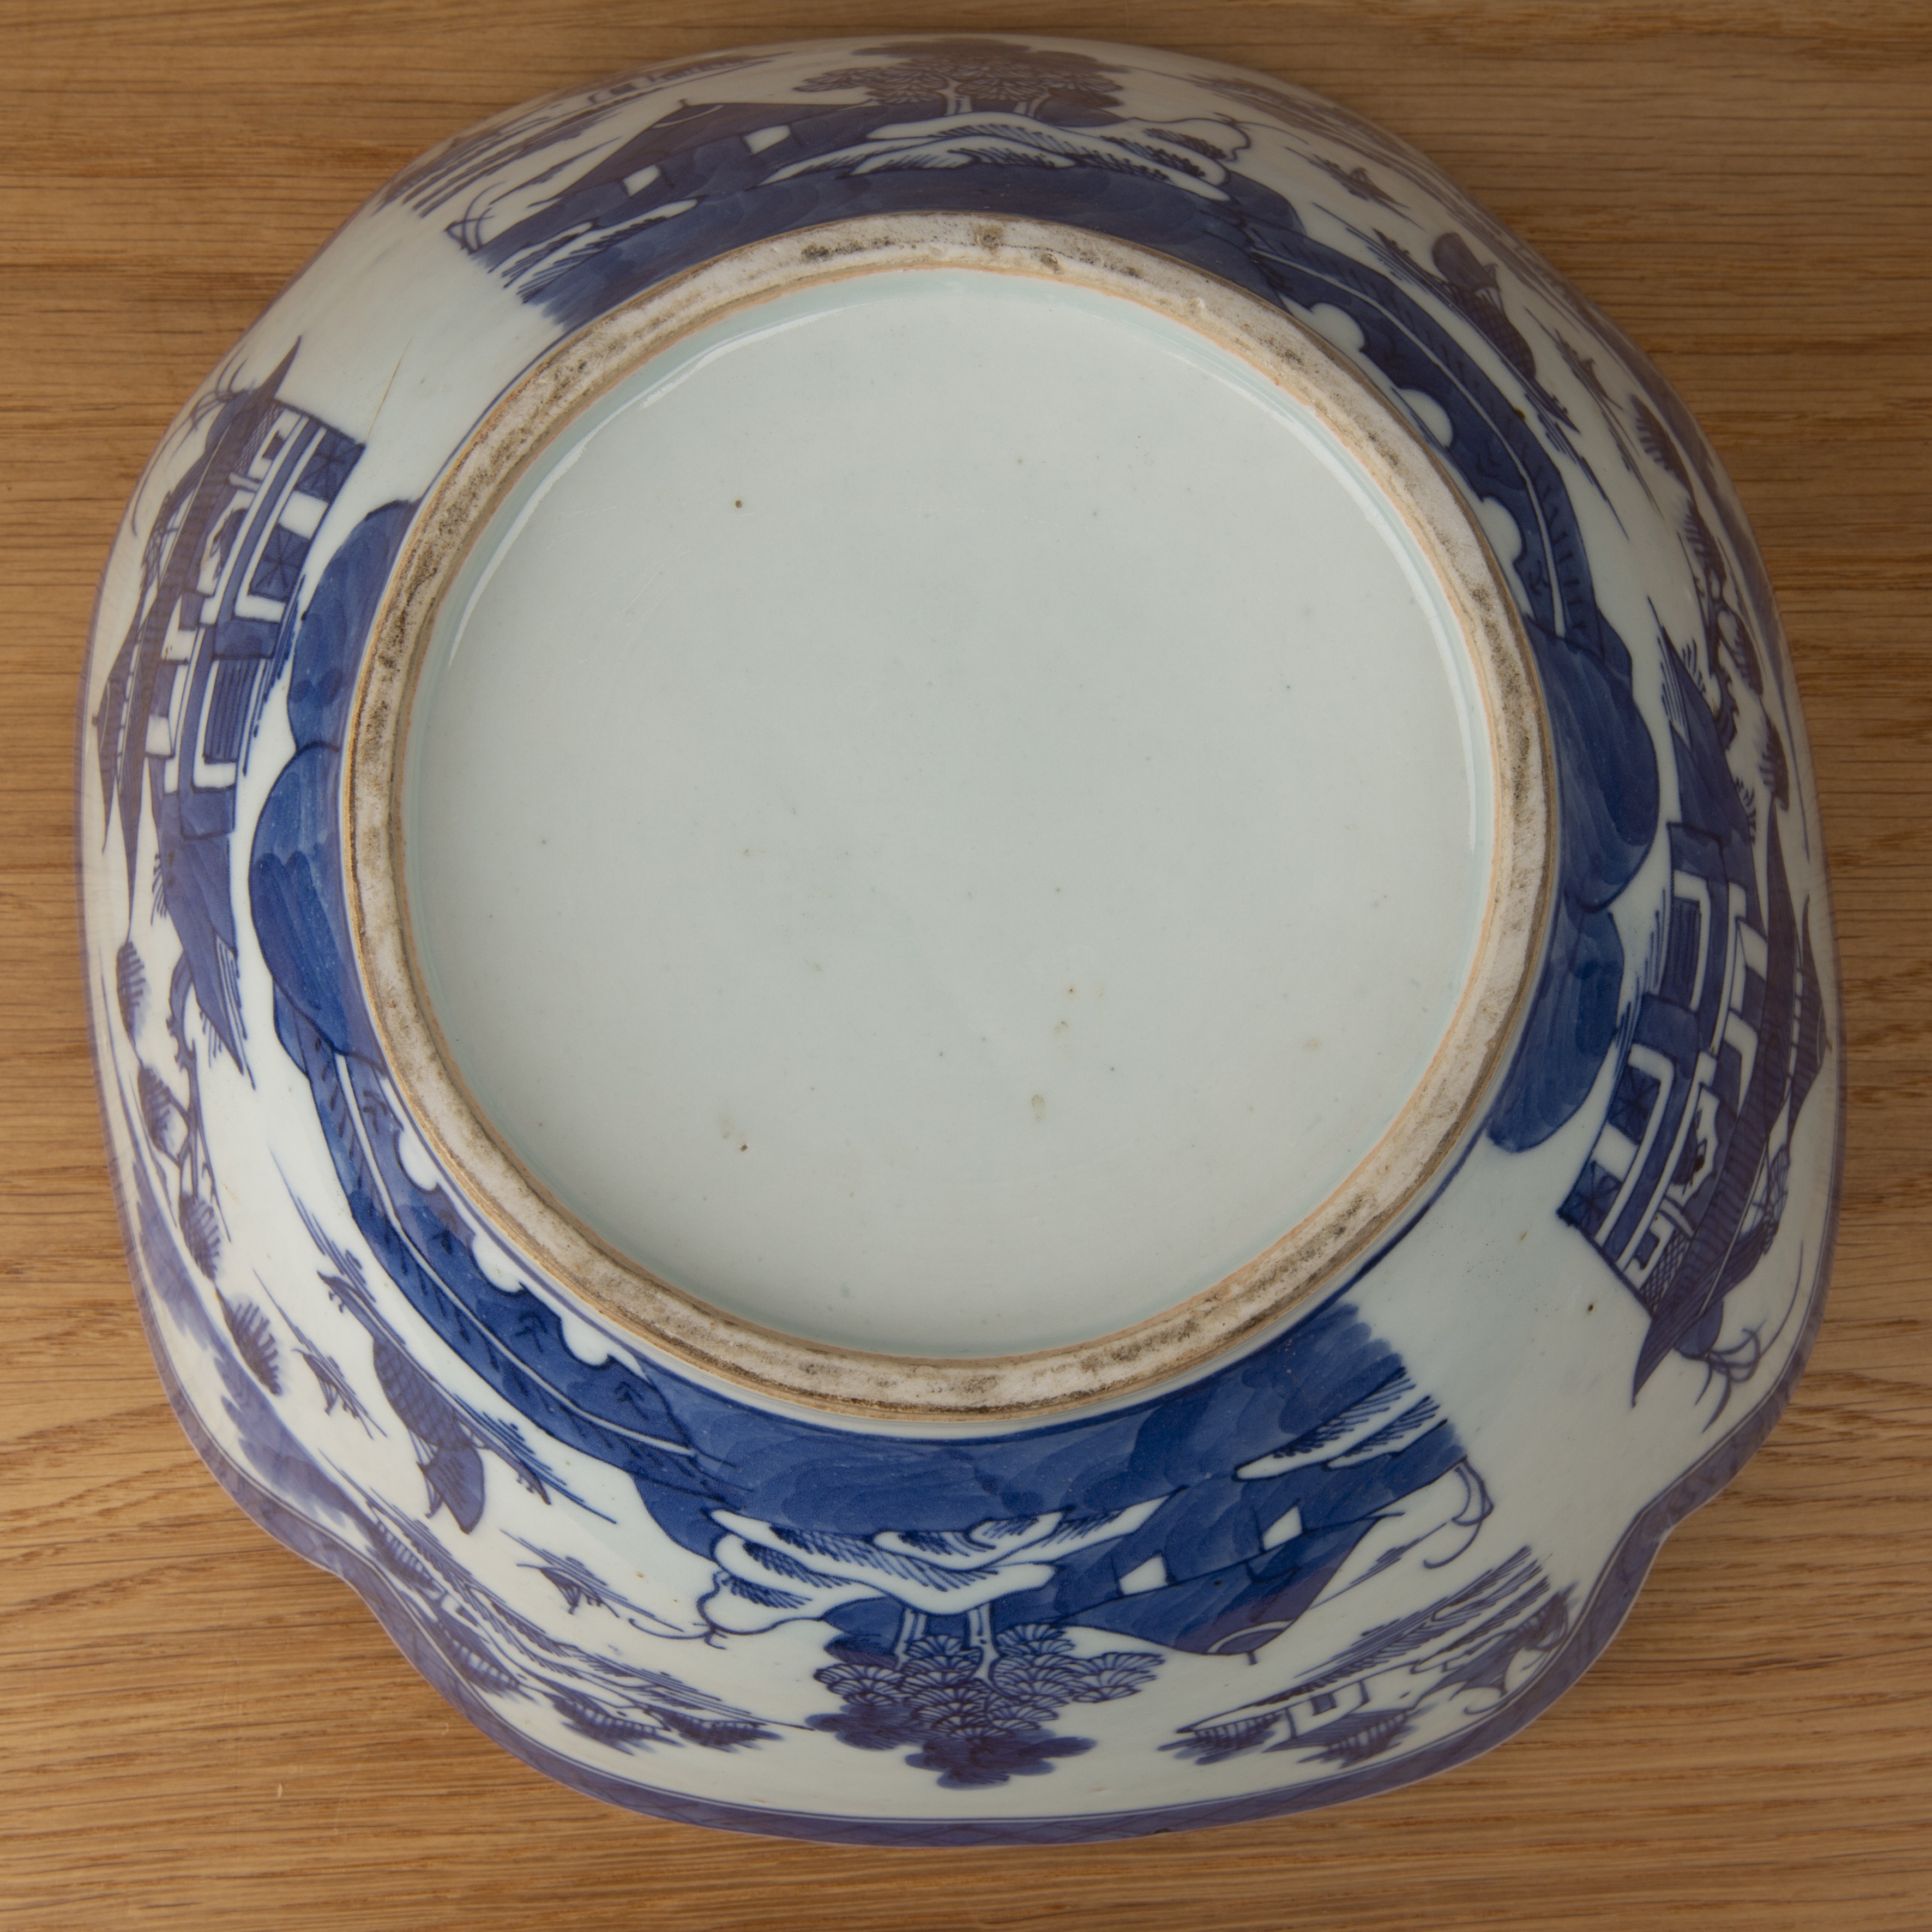 Export blue and white porcelain square bowl Chinese, circa 1800 painted with a central pavilion - Image 4 of 4